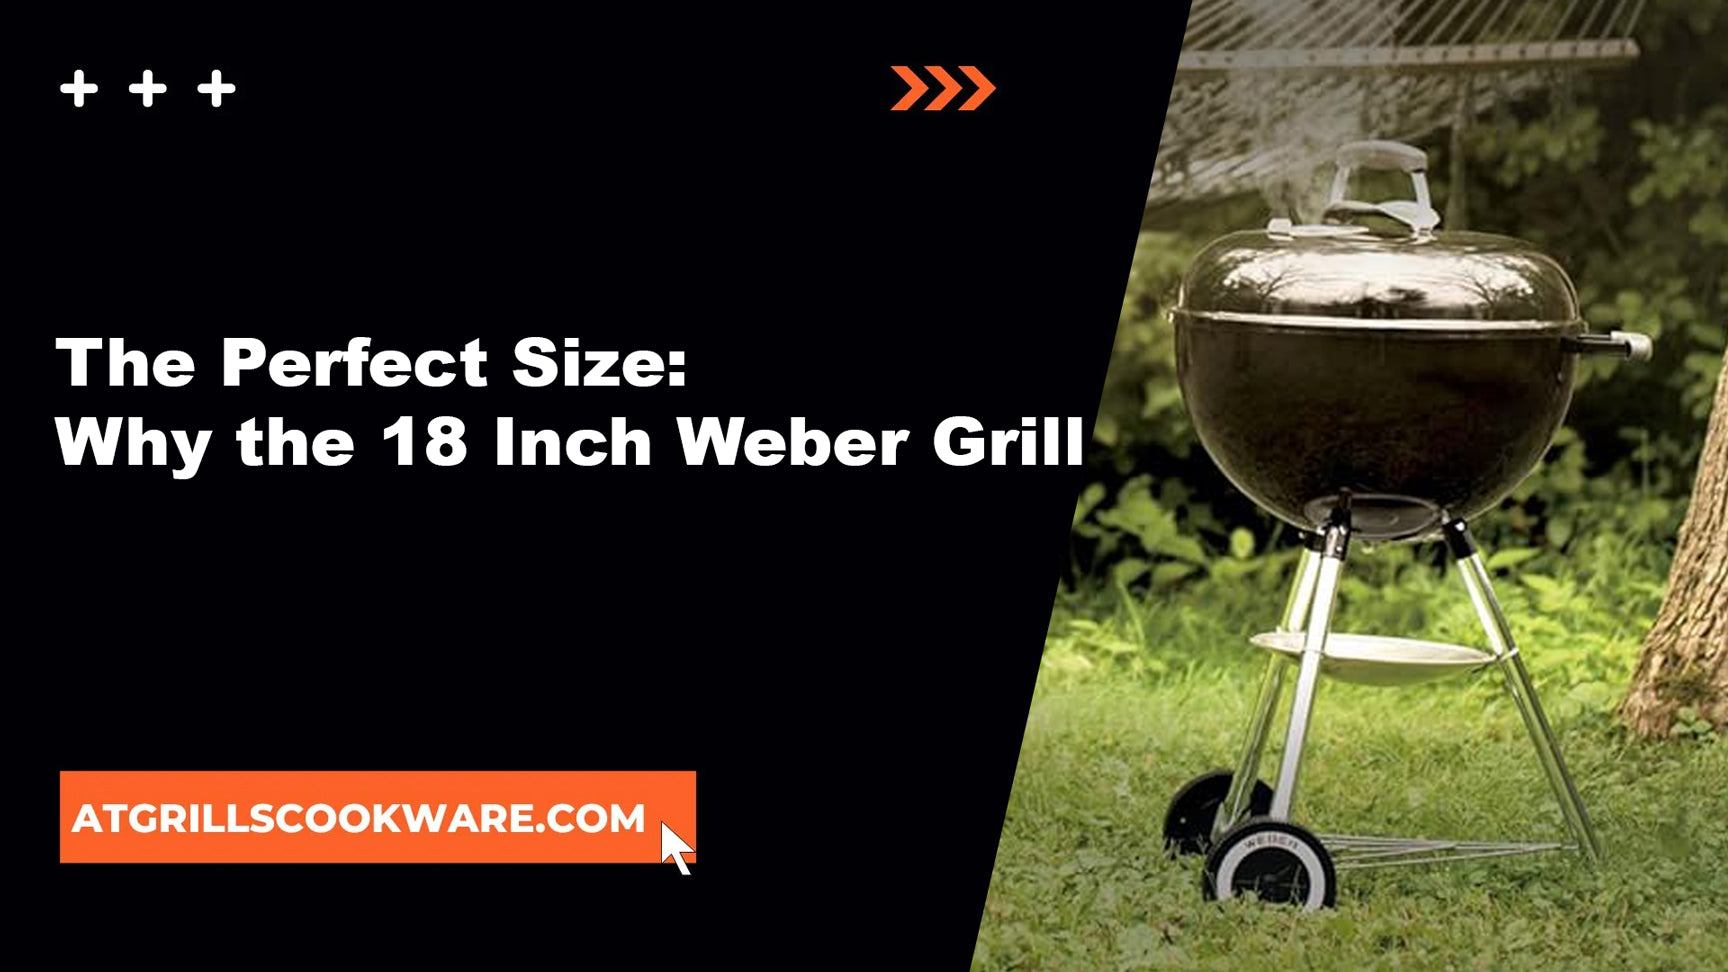 The Perfect Size: Why the 18 Inch Weber Grill is Ideal for Grilling Enthusiasts